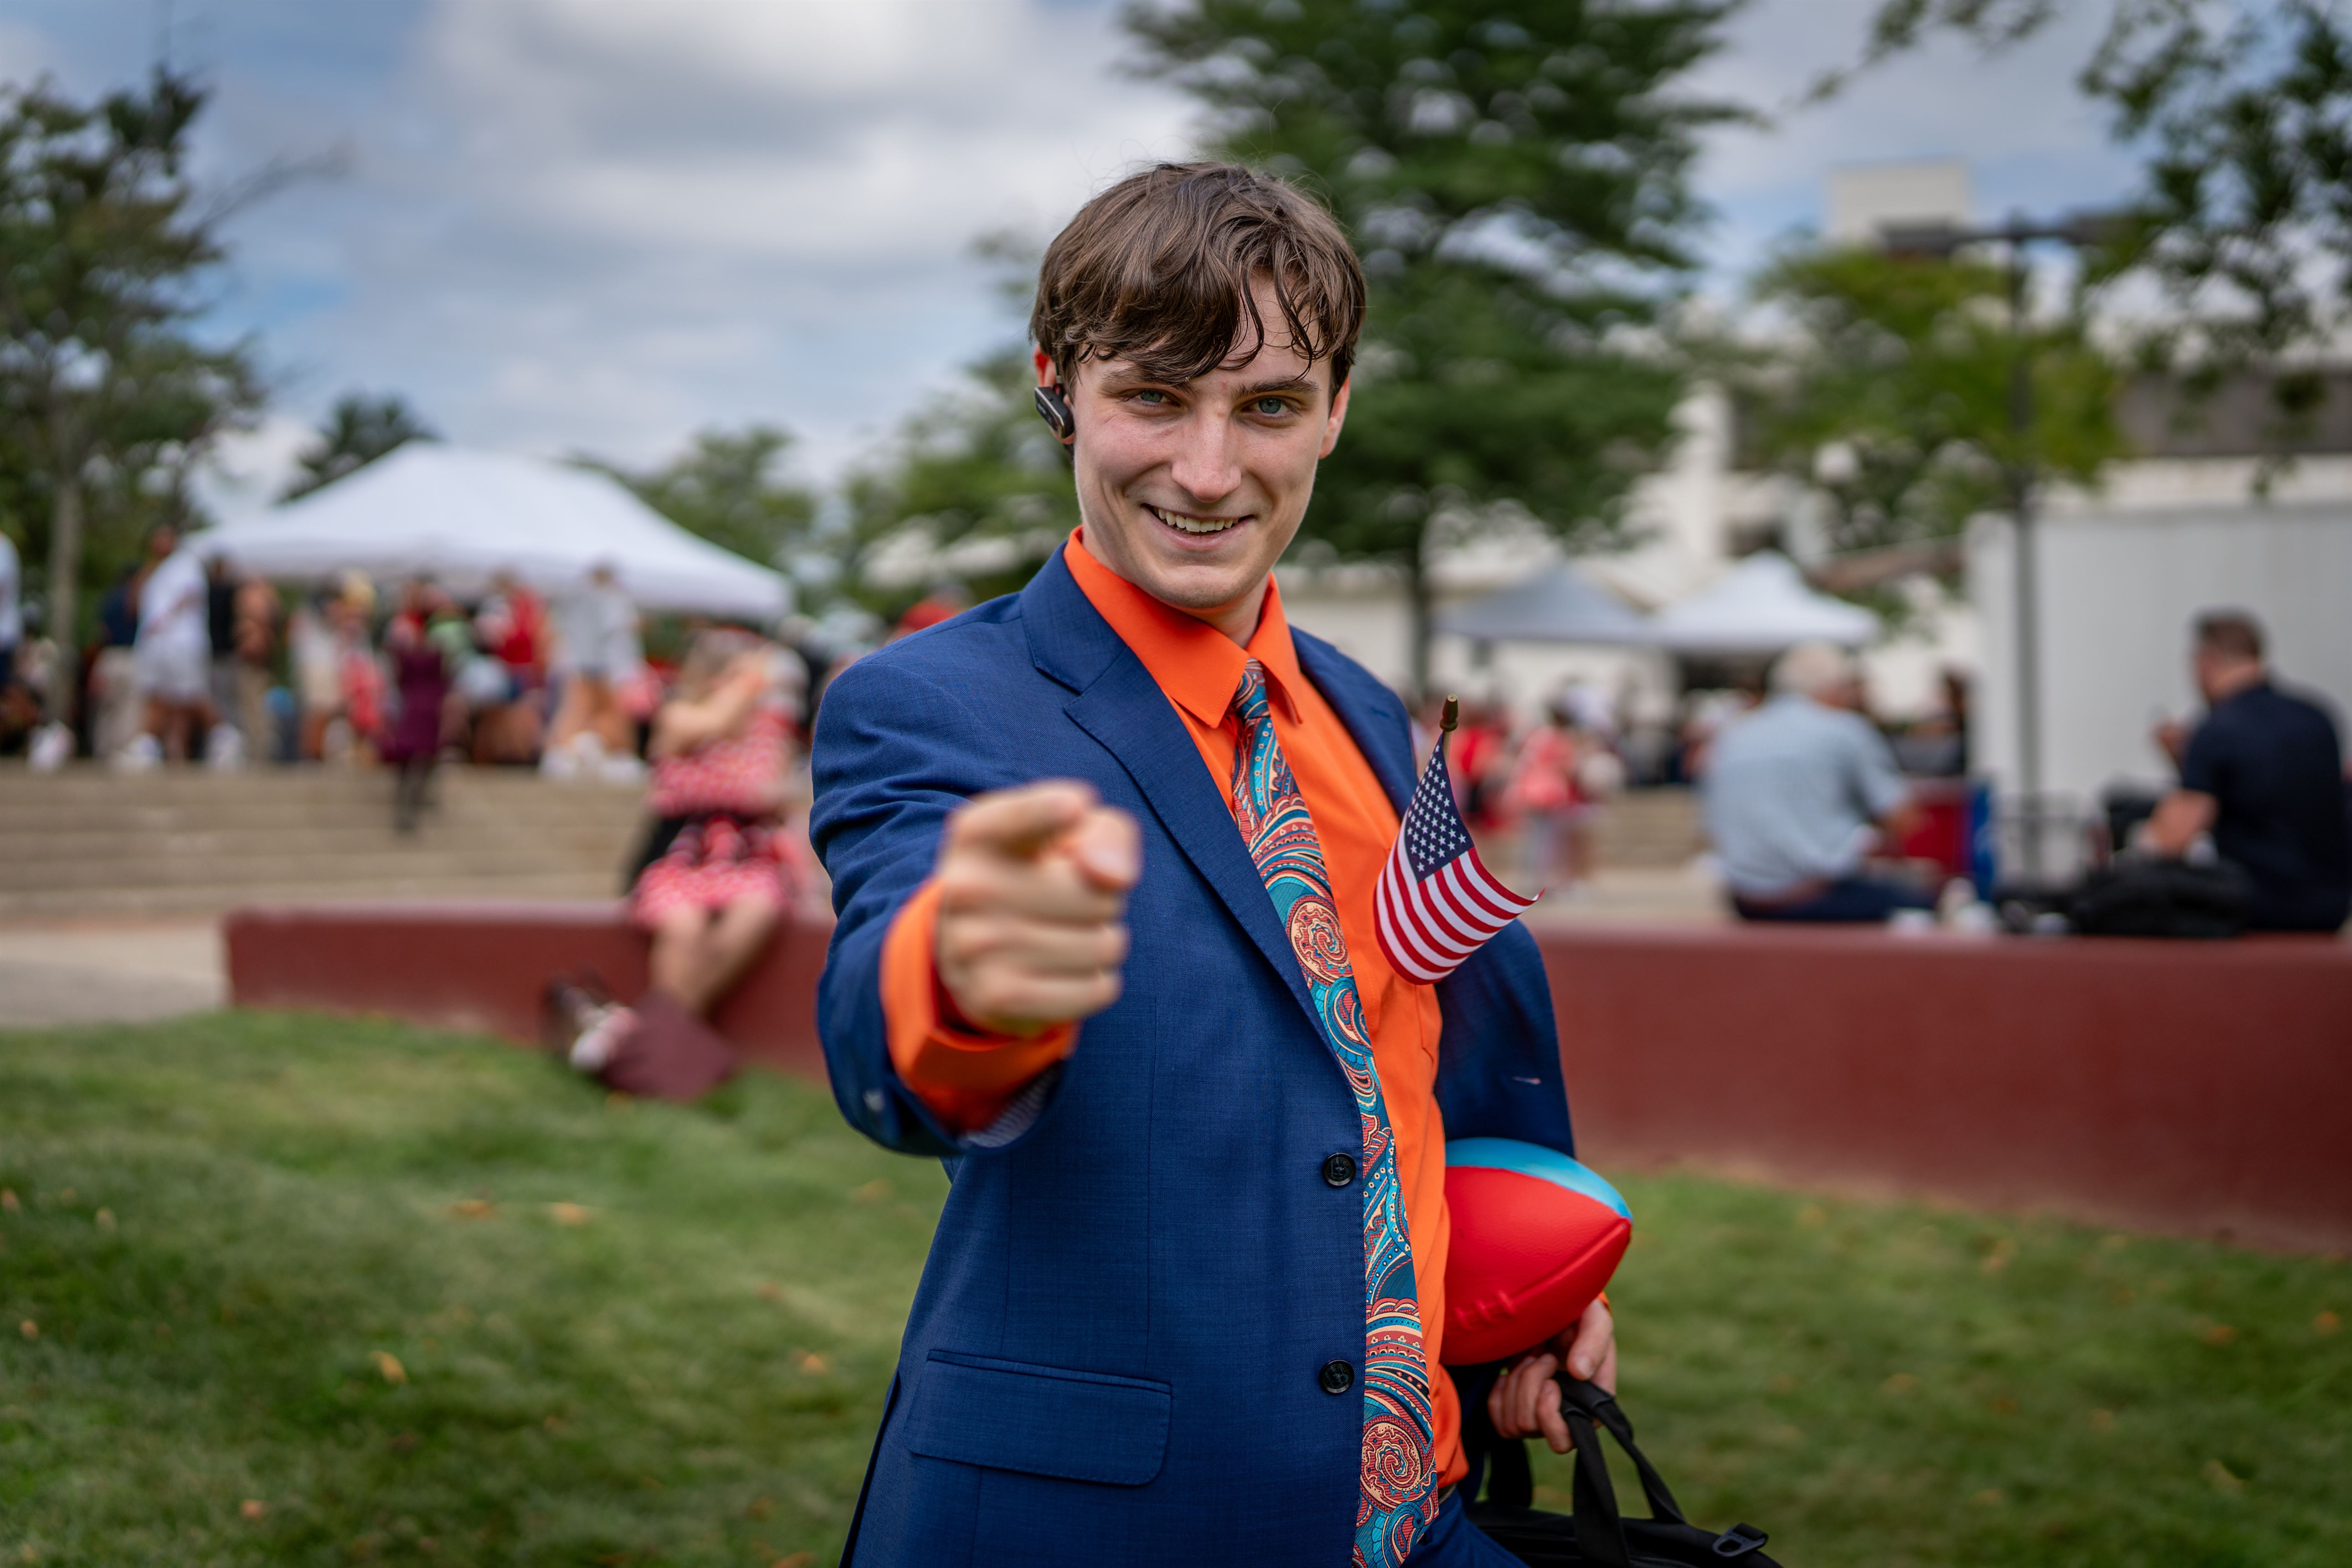 Alex Greaney, a senior film and TV major, poses as Saul Goodman from the popular show "Better Call Saul", on